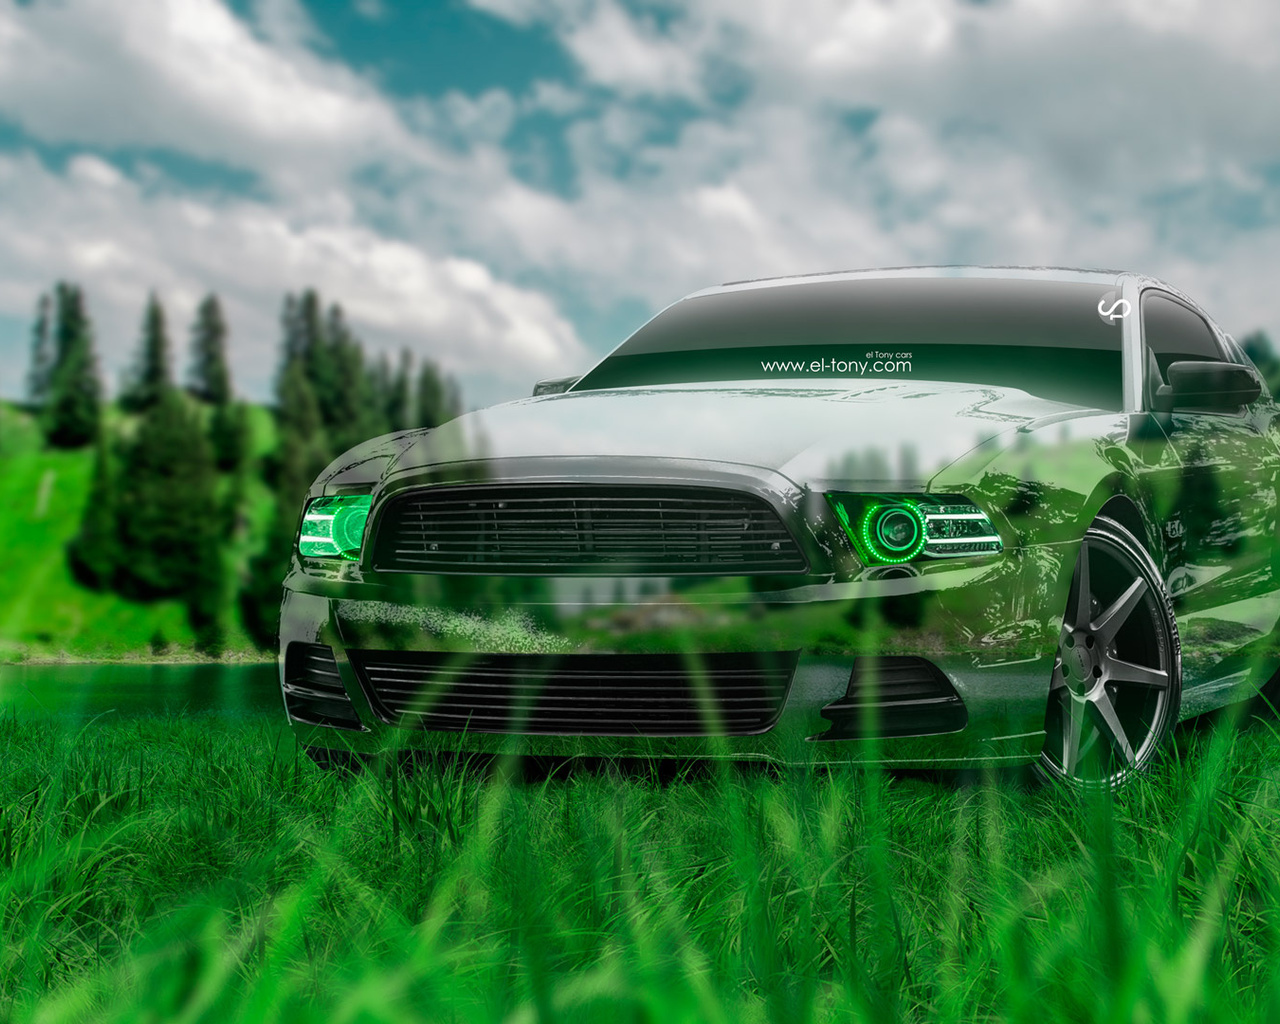 tony kokhan, ford, mustang, gt, crystal, nature, car, muscle, green, grass, american, auto, el tony cars, photoshop, design, art, style, hd wallpapers,  , , , , , , , , , , , , , 